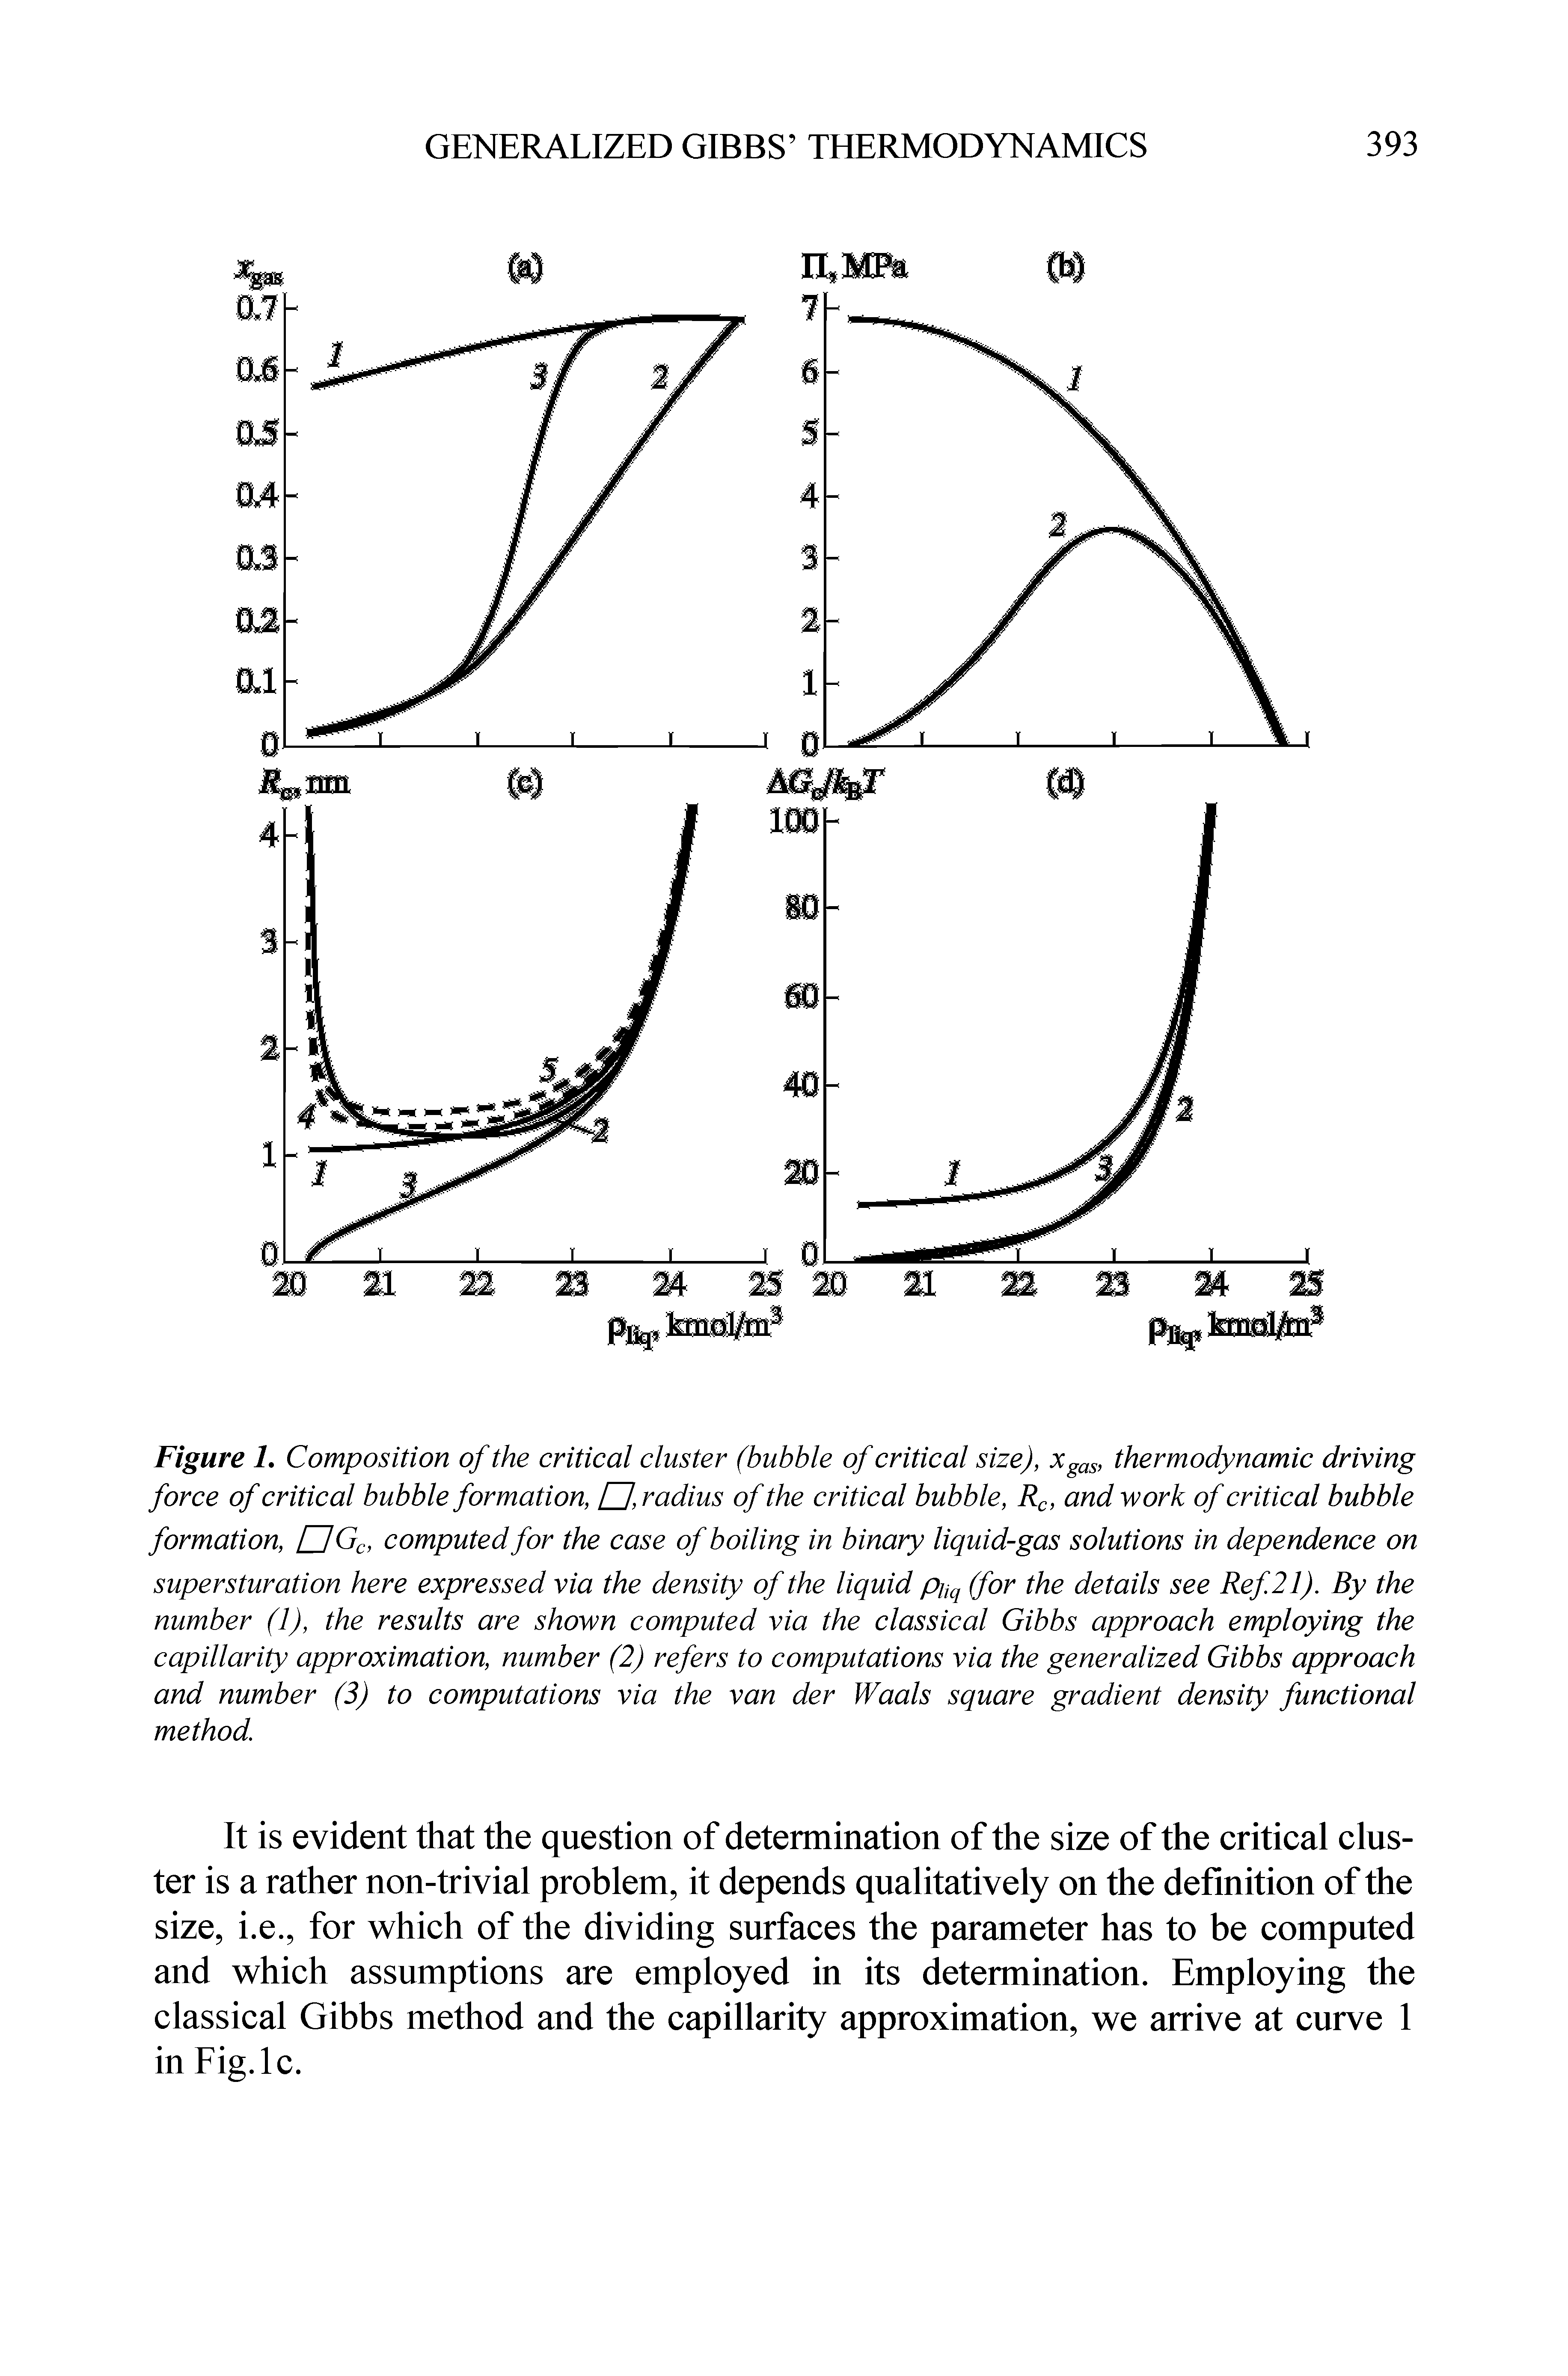 Figure 1, Composition of the critical cluster (bubble of critical size), Xgas, thermodynamic driving force of critical bubble formation, CJ,radius of the critical bubble, Rc, and work of critical bubble formation, [J Gc, computed for the case of boiling in binary liquid-gas solutions in dependence on supersturation here expressed via the density of the liquid puq (for the details see Ref 21). By the number (1), the results are shown computed via the classical Gibbs approach employing the capillarity approximation, number (2) refers to computations via the generalized Gibbs approach and number (3) to computations via the van der Waals square gradient density functional method.